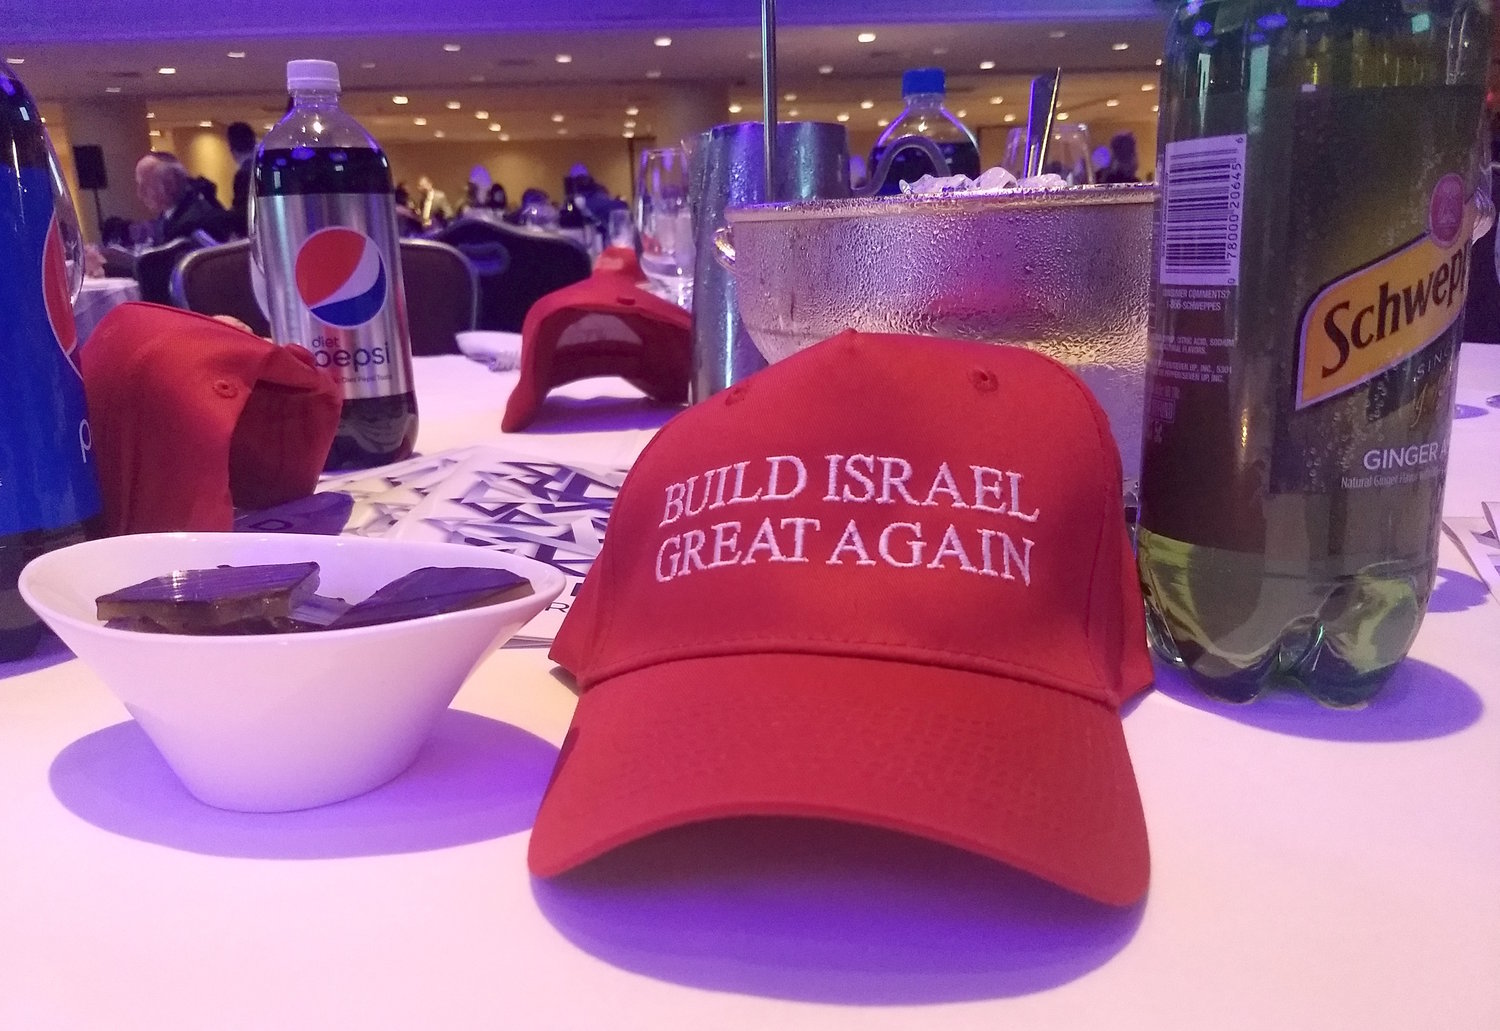 At NCYI's 2019 gala, tables were decorated with MAGA-style hats reading "Build Israel Great Again."